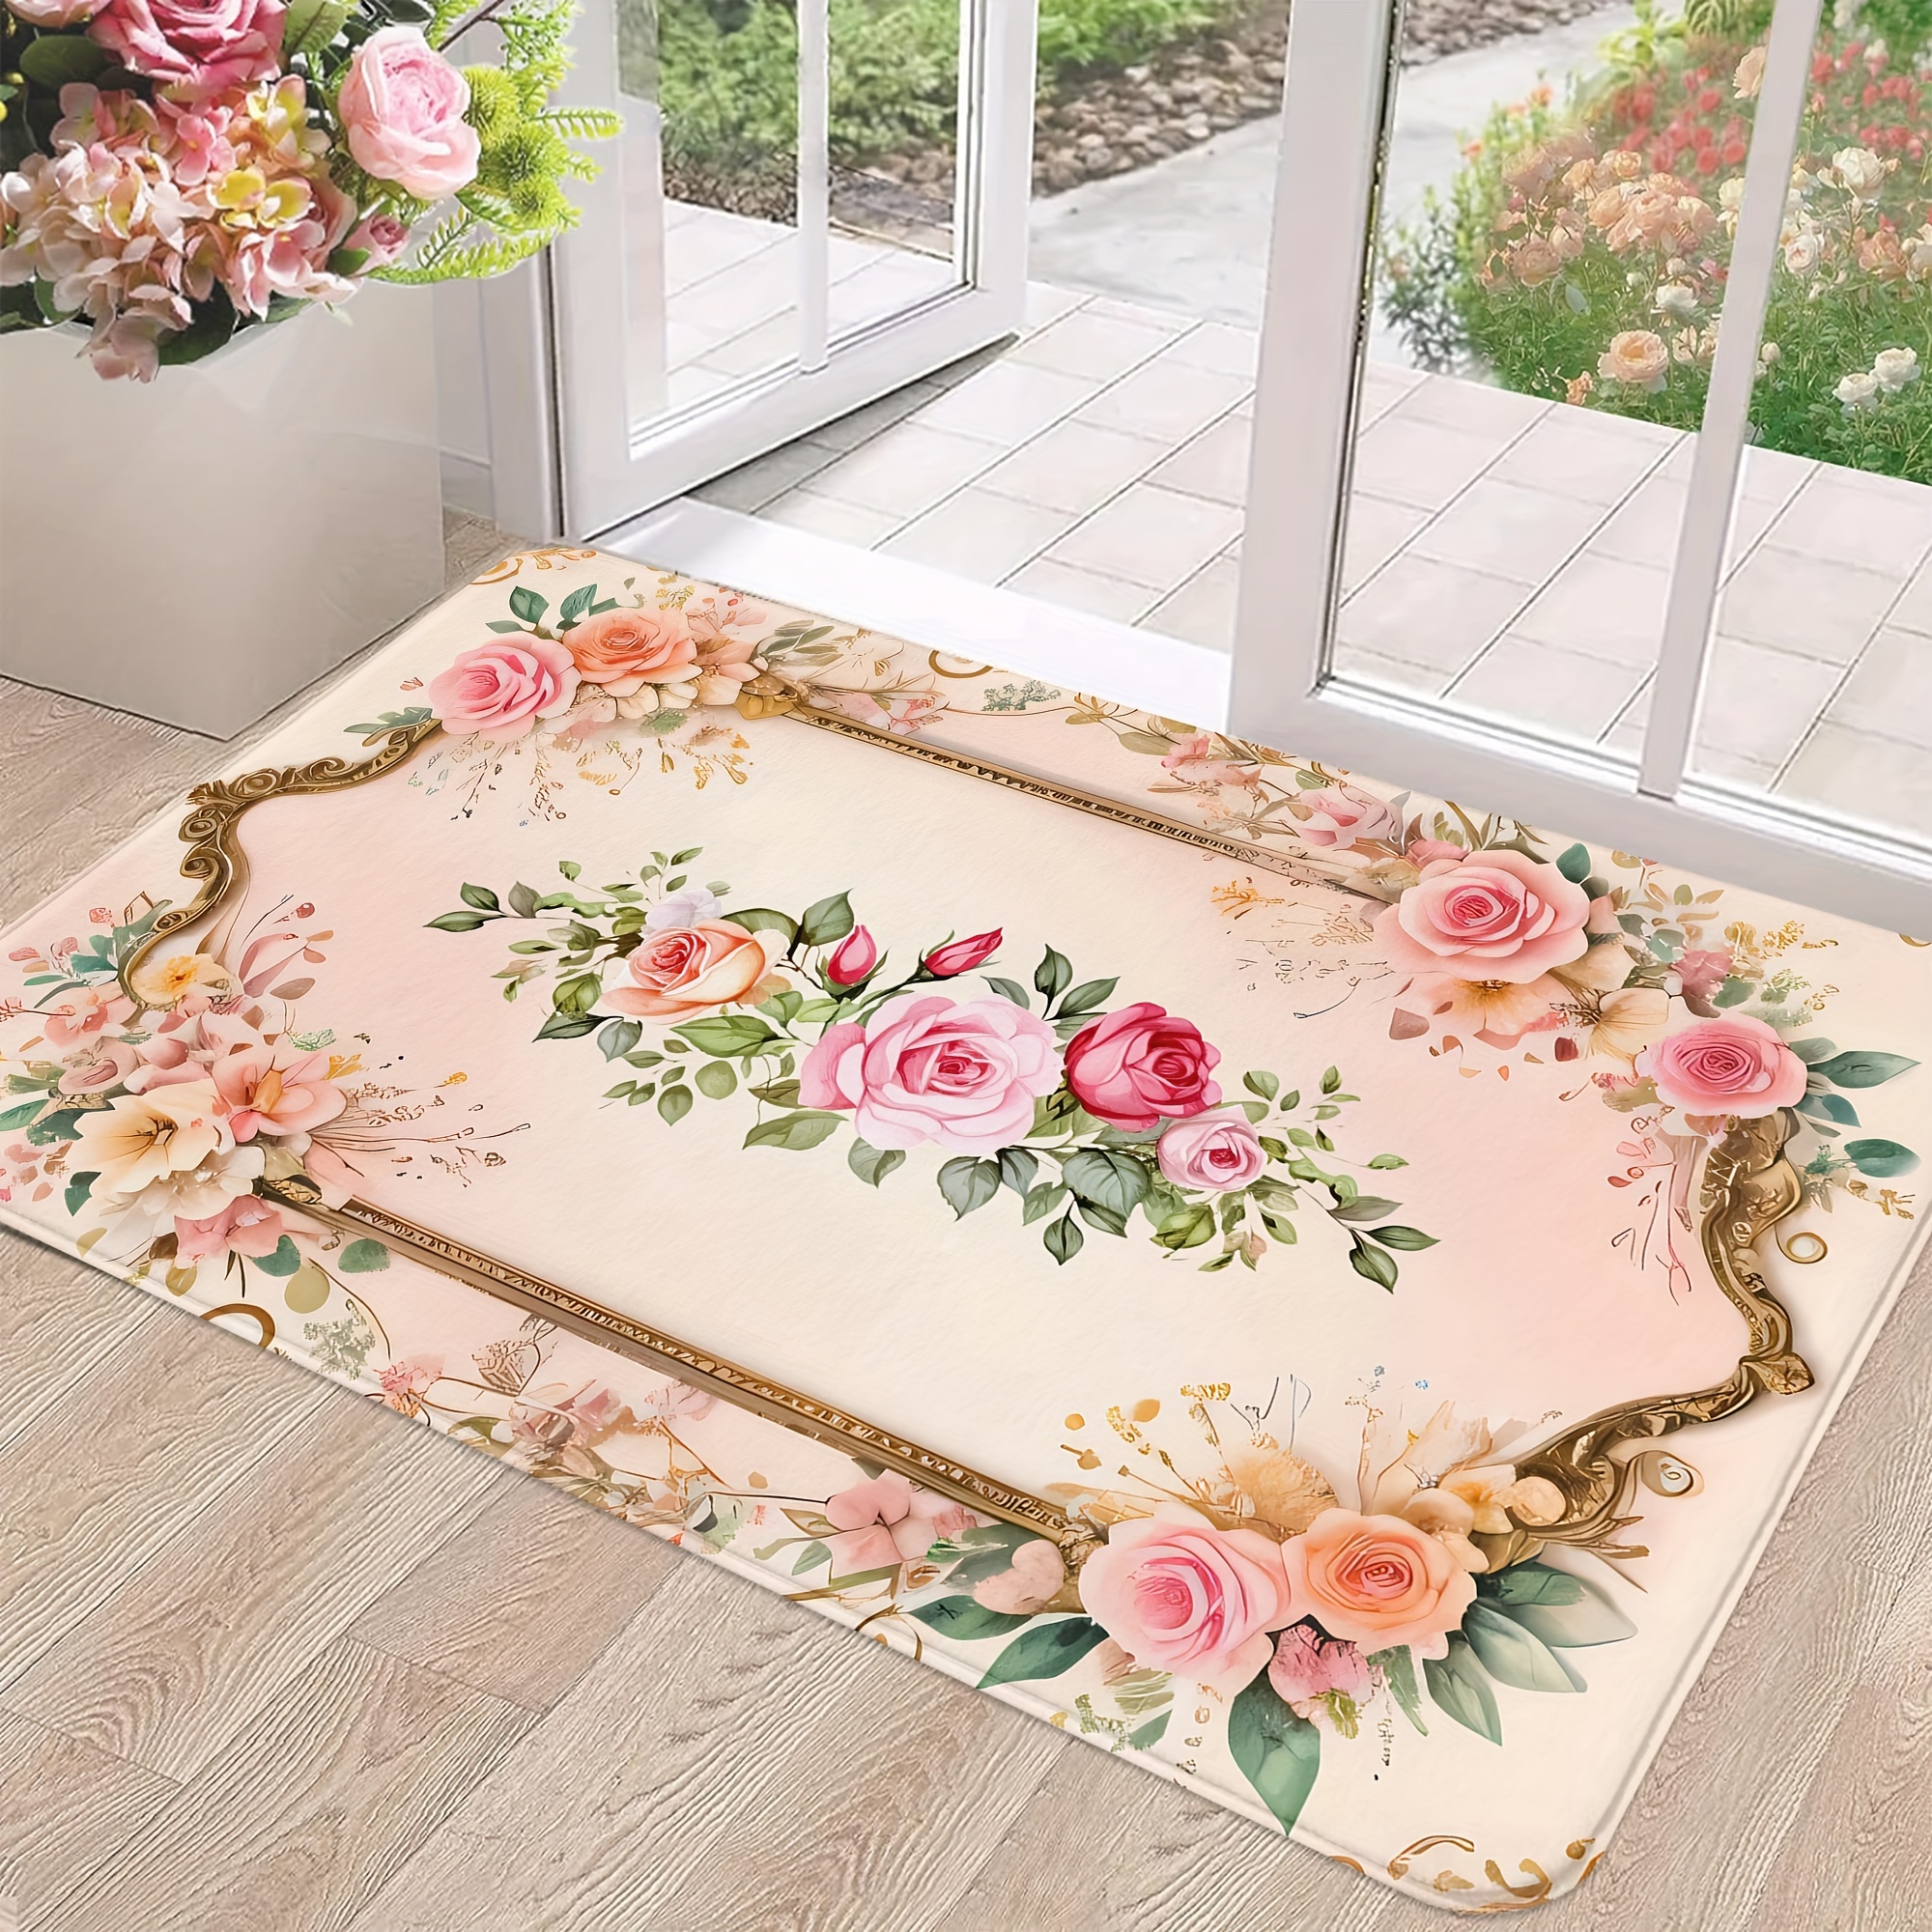 

Vintage Floral Printed Doormat - Non-slip Rubber Backing, Stain & Dirt Resistant, Machine Washable, Lightweight Braided Polyester Area Rug For Entryway, Kitchen, Home Decor - 12mm Thickness